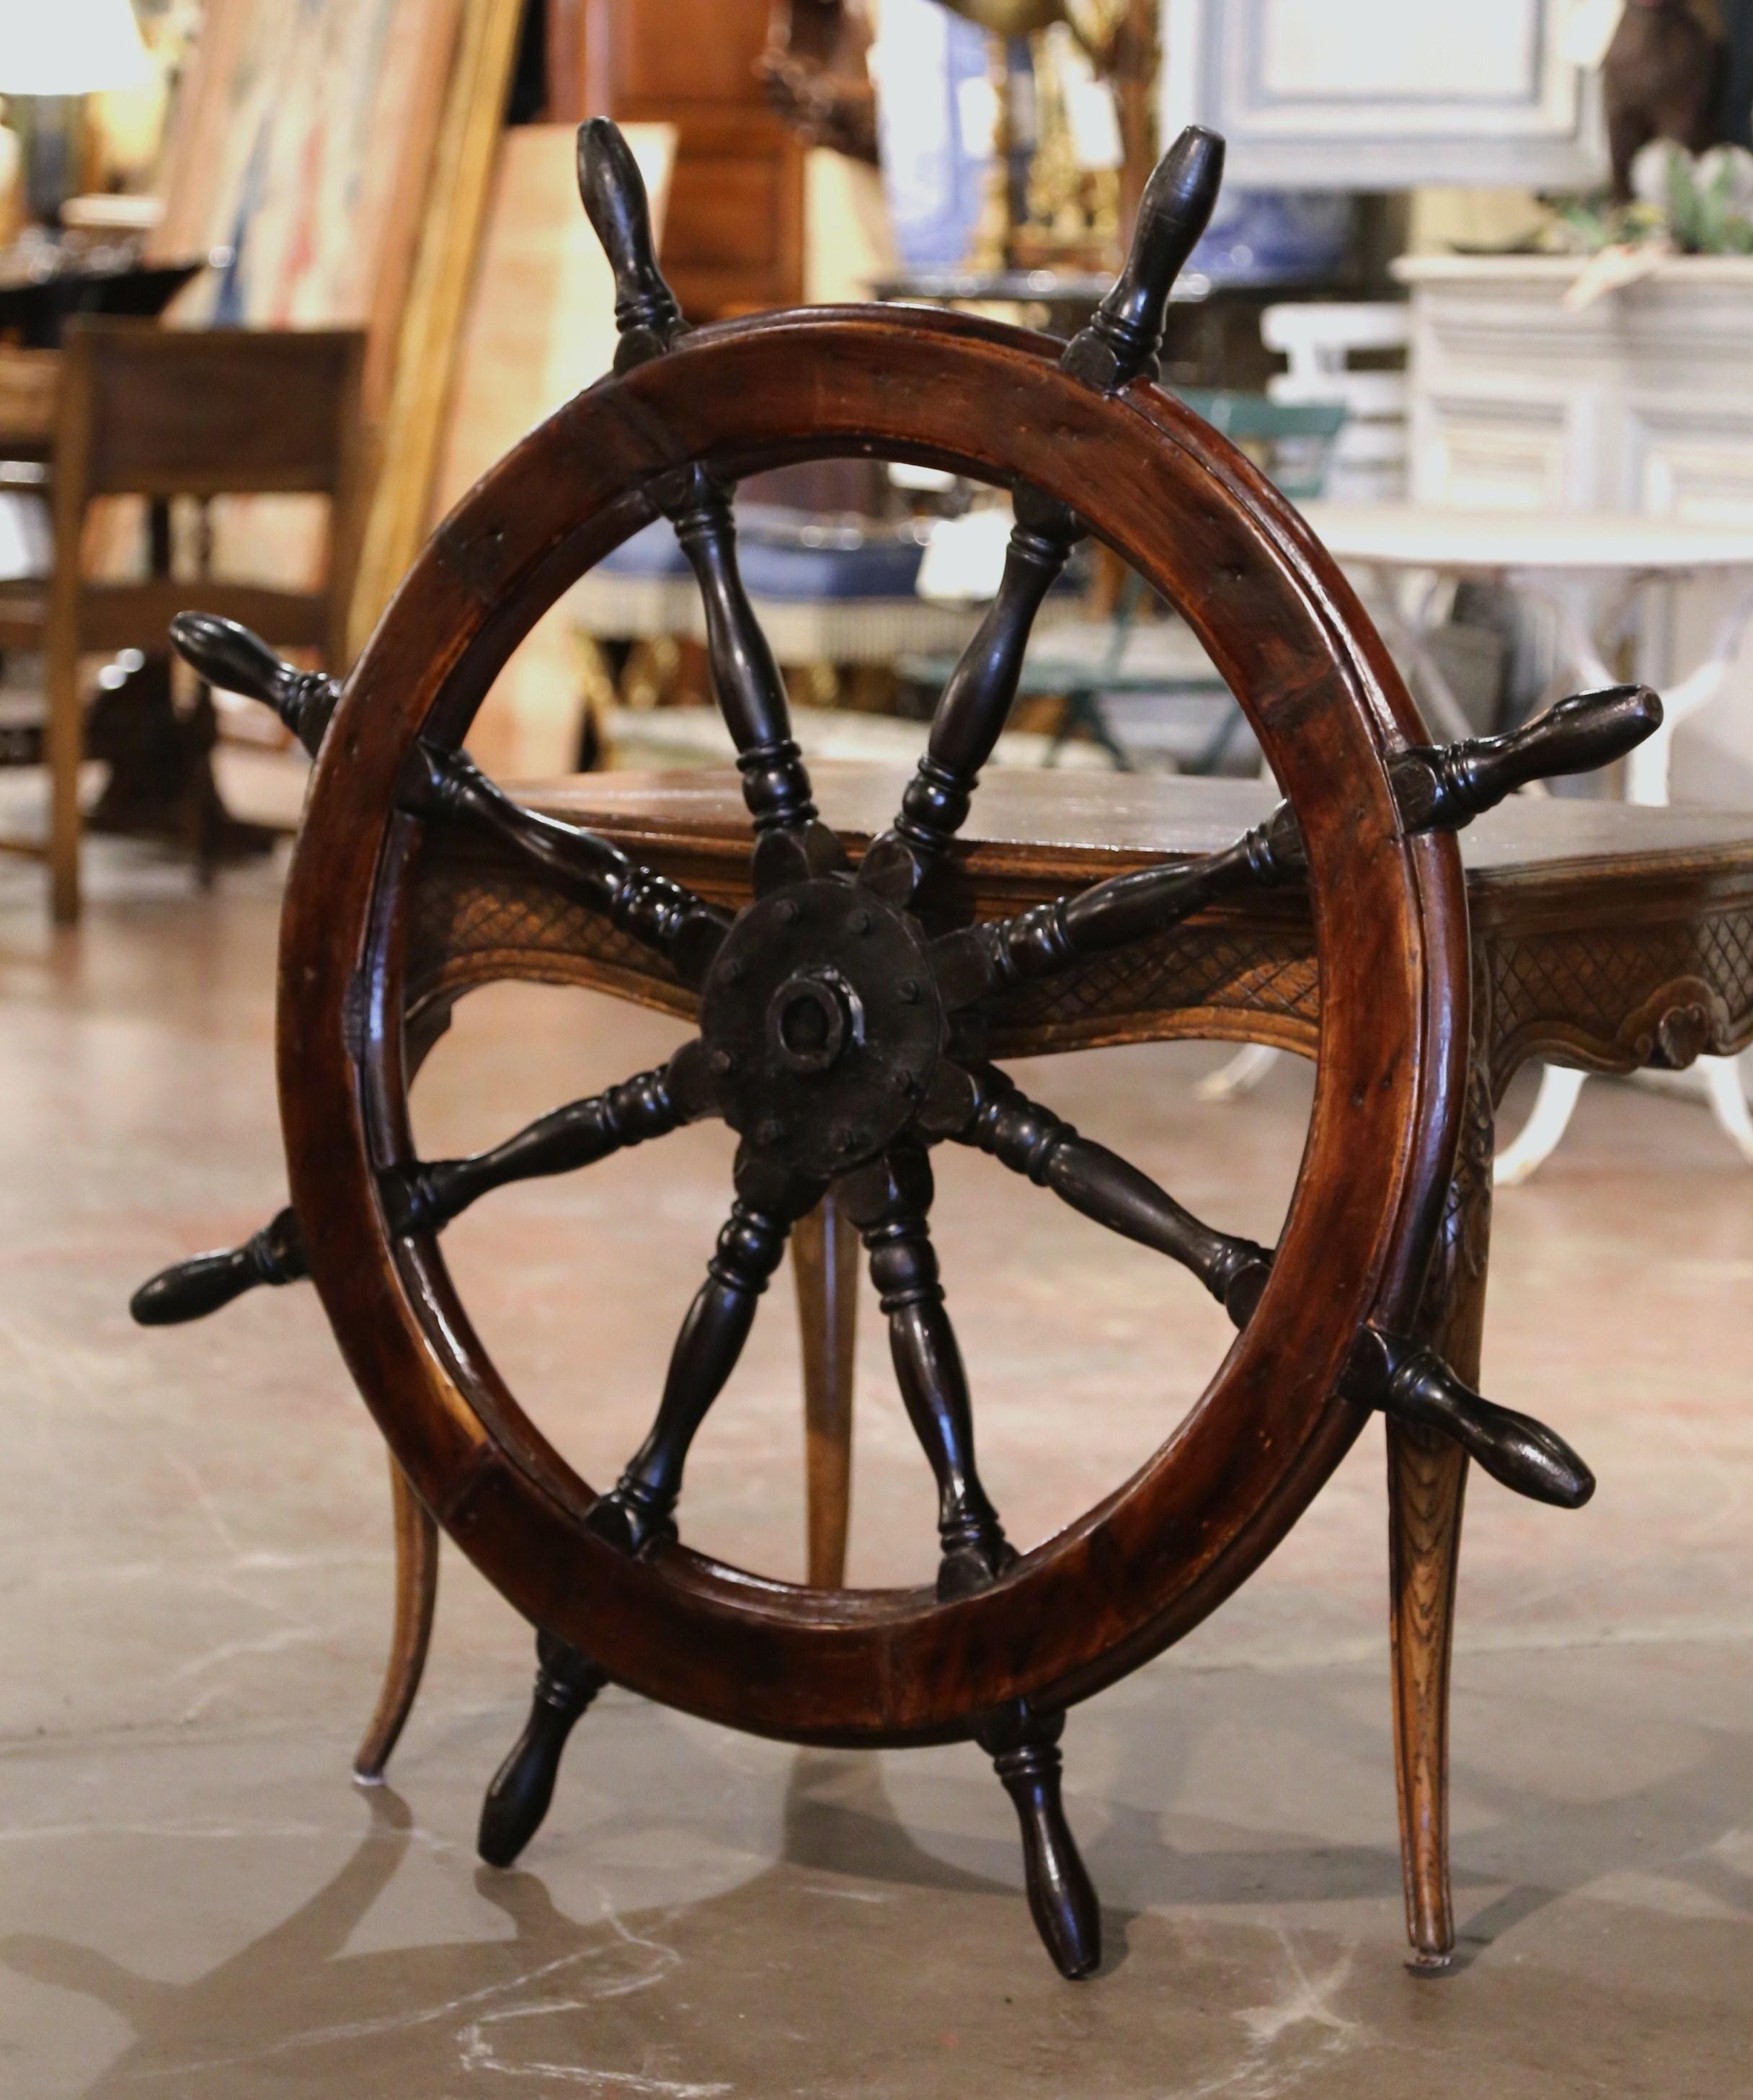 This antique wooden ship wheel was carved in France, circa 1880. The traditional, fruit wood nautical object has its original metal brace, eight turned handles and is in excellent condition commensurate with age and use, and adorns the original rich